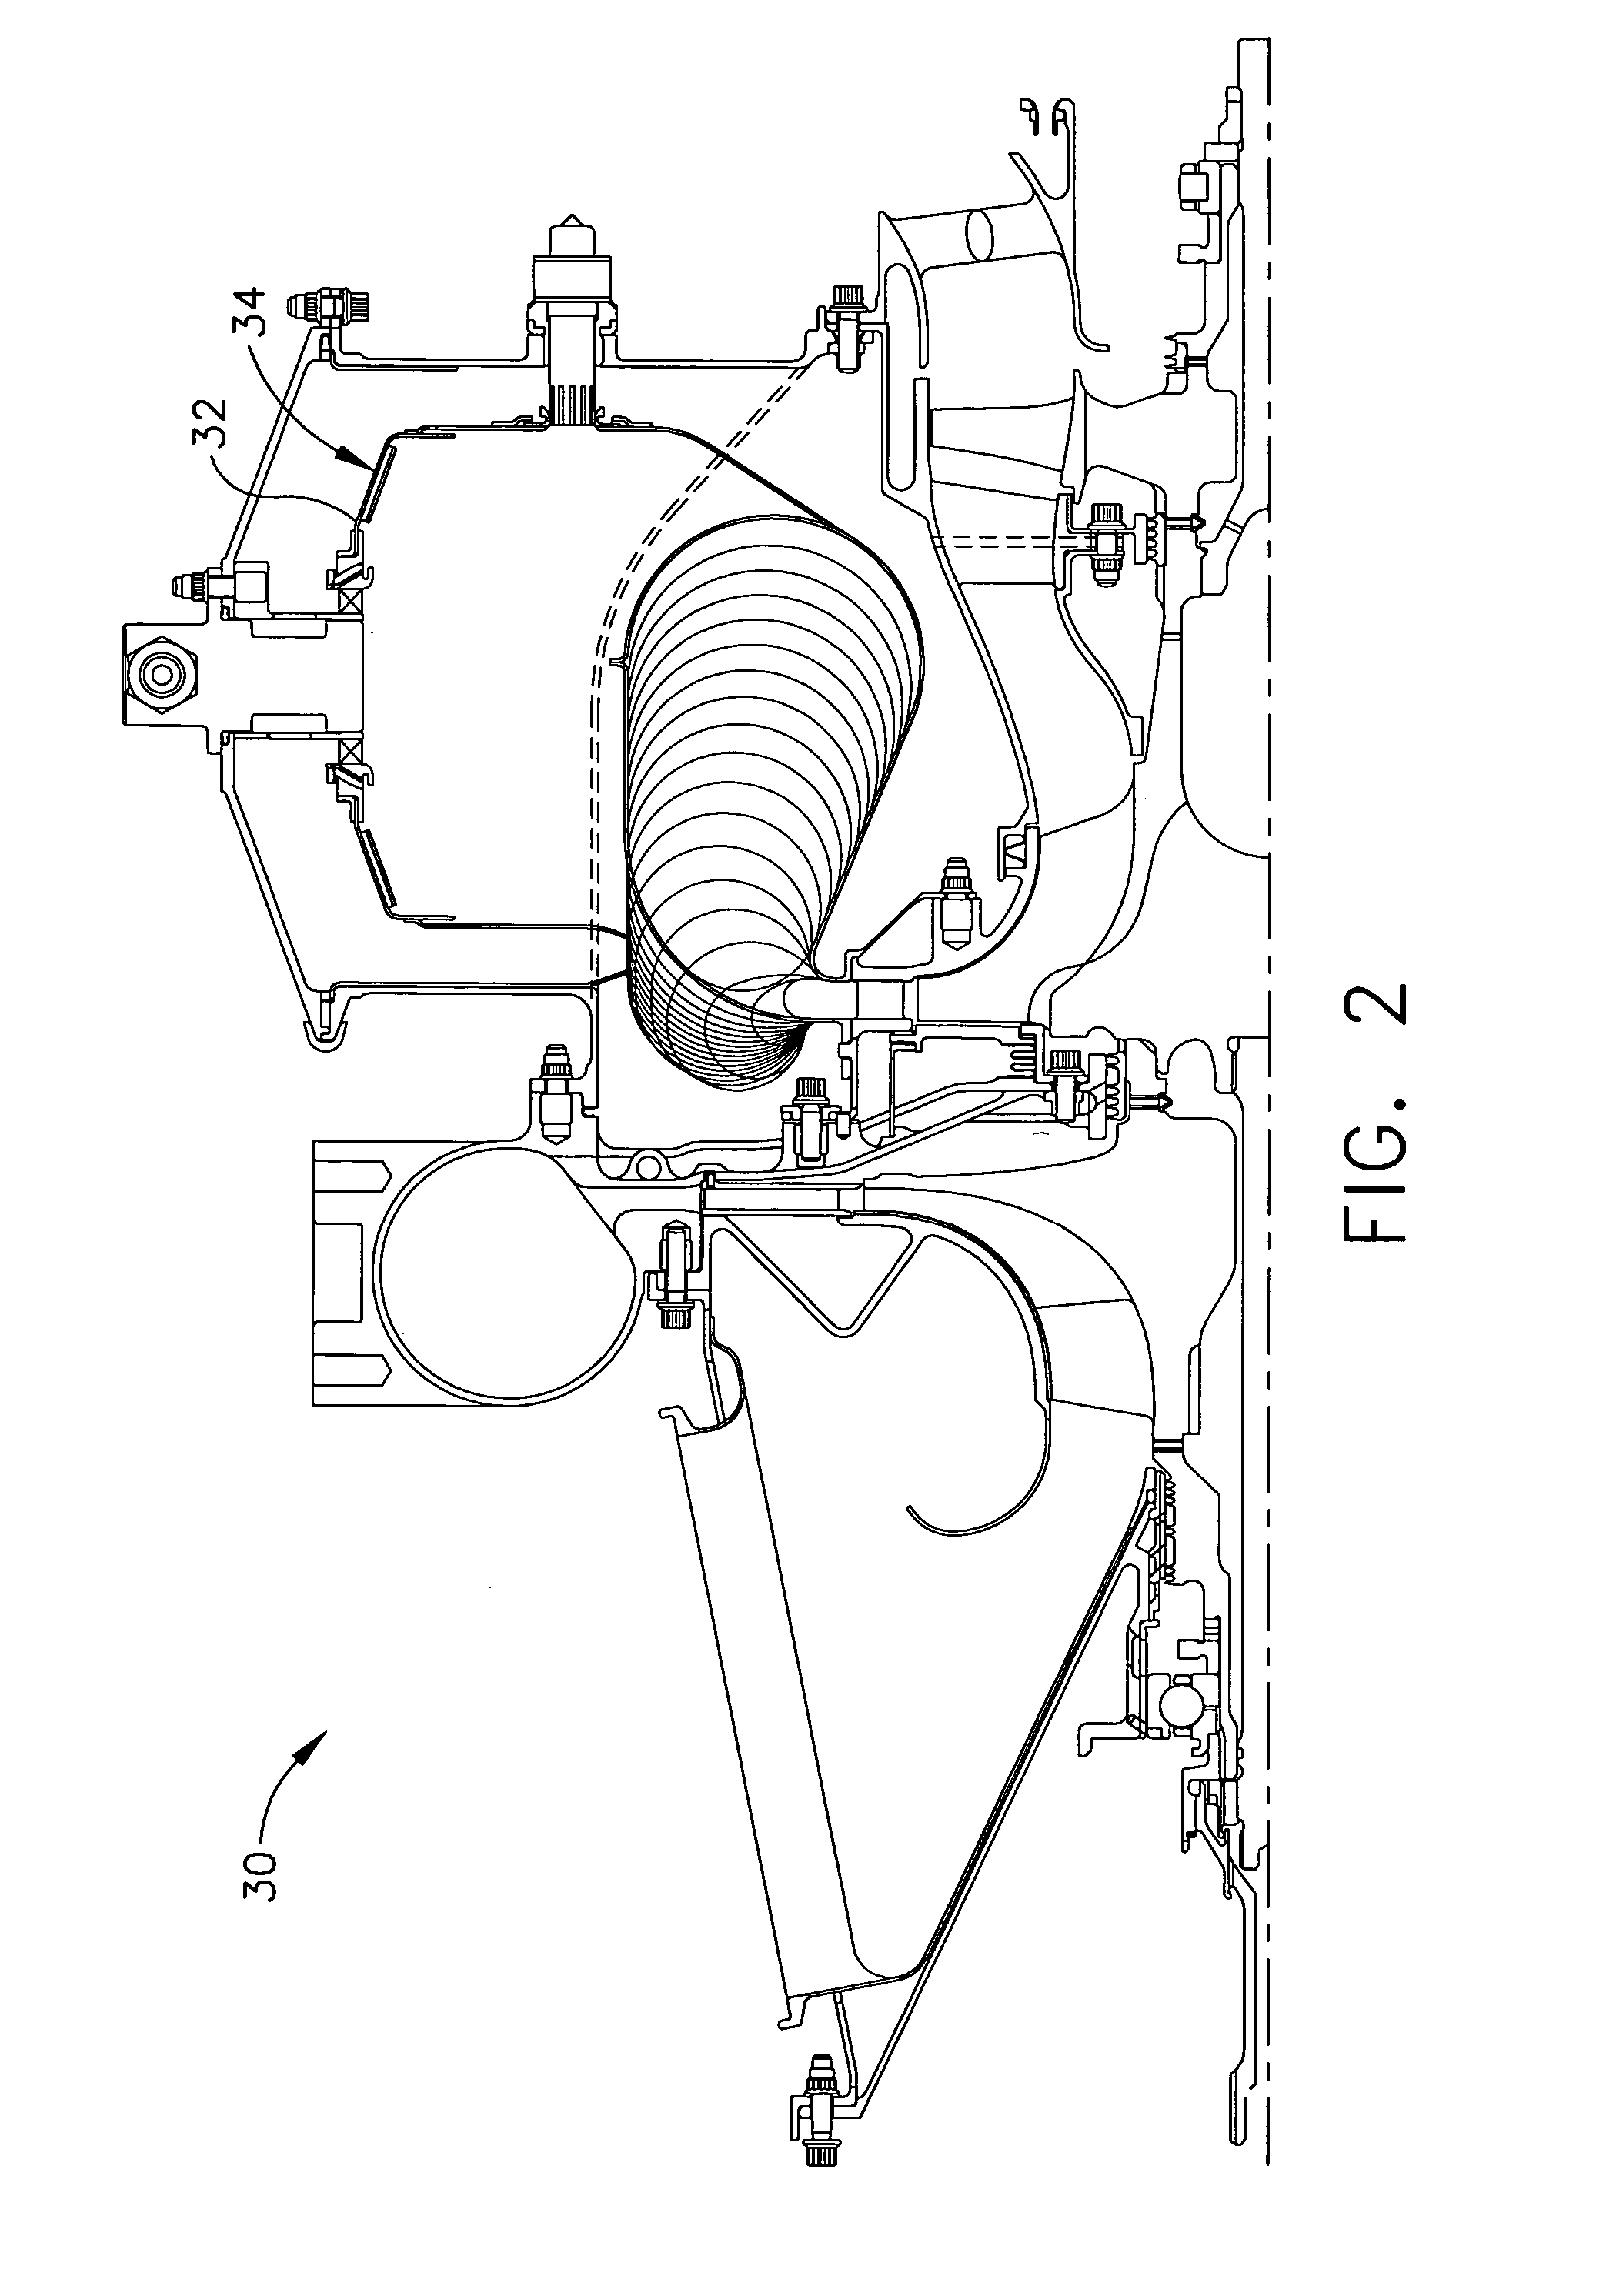 Uniform effusion cooling method for a can combustion chamber